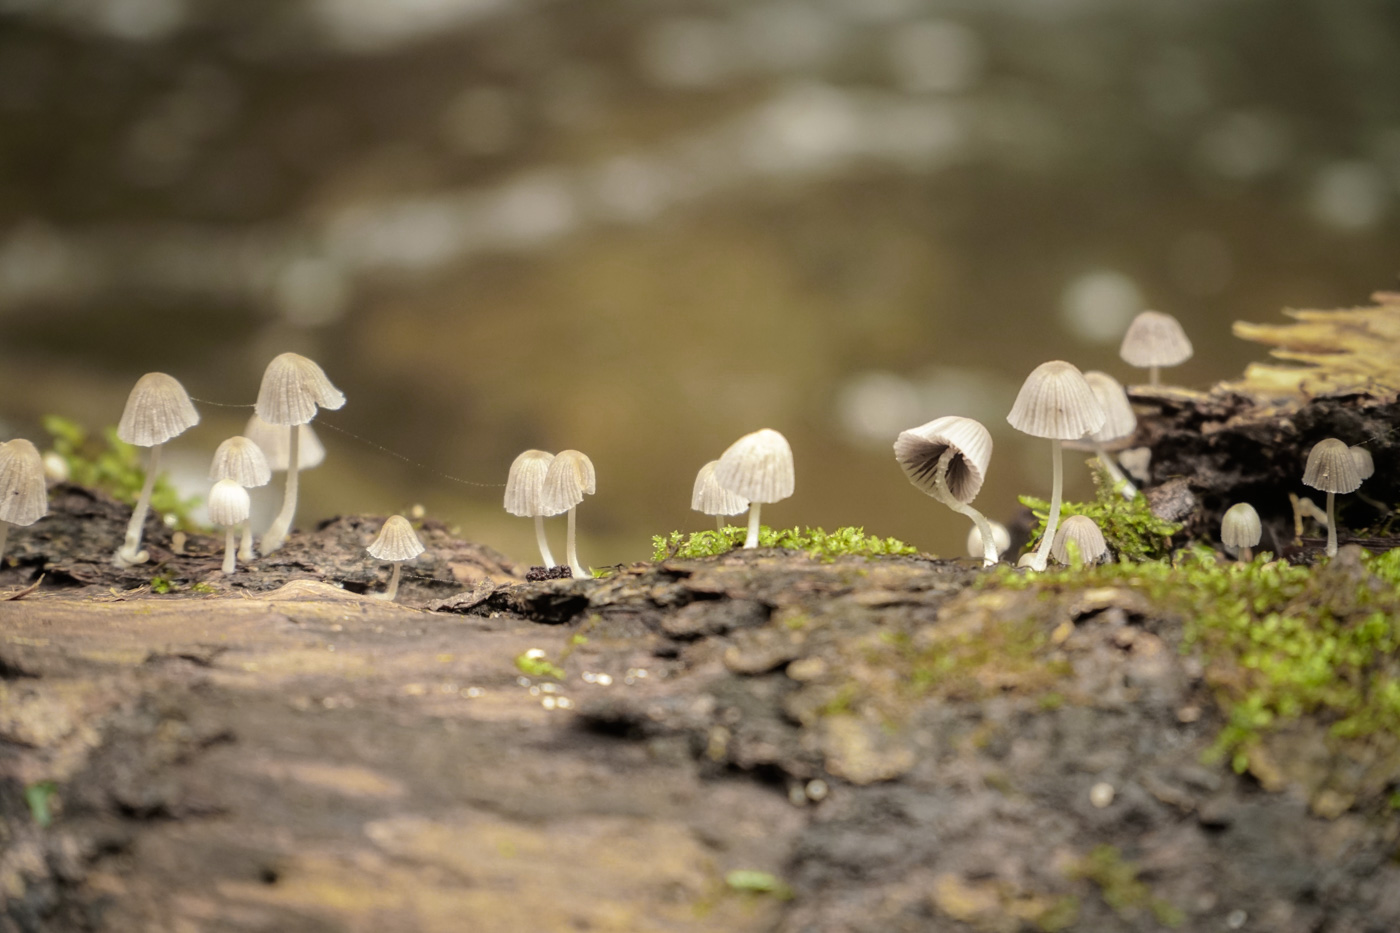 small mushrooms on top of a tree branch